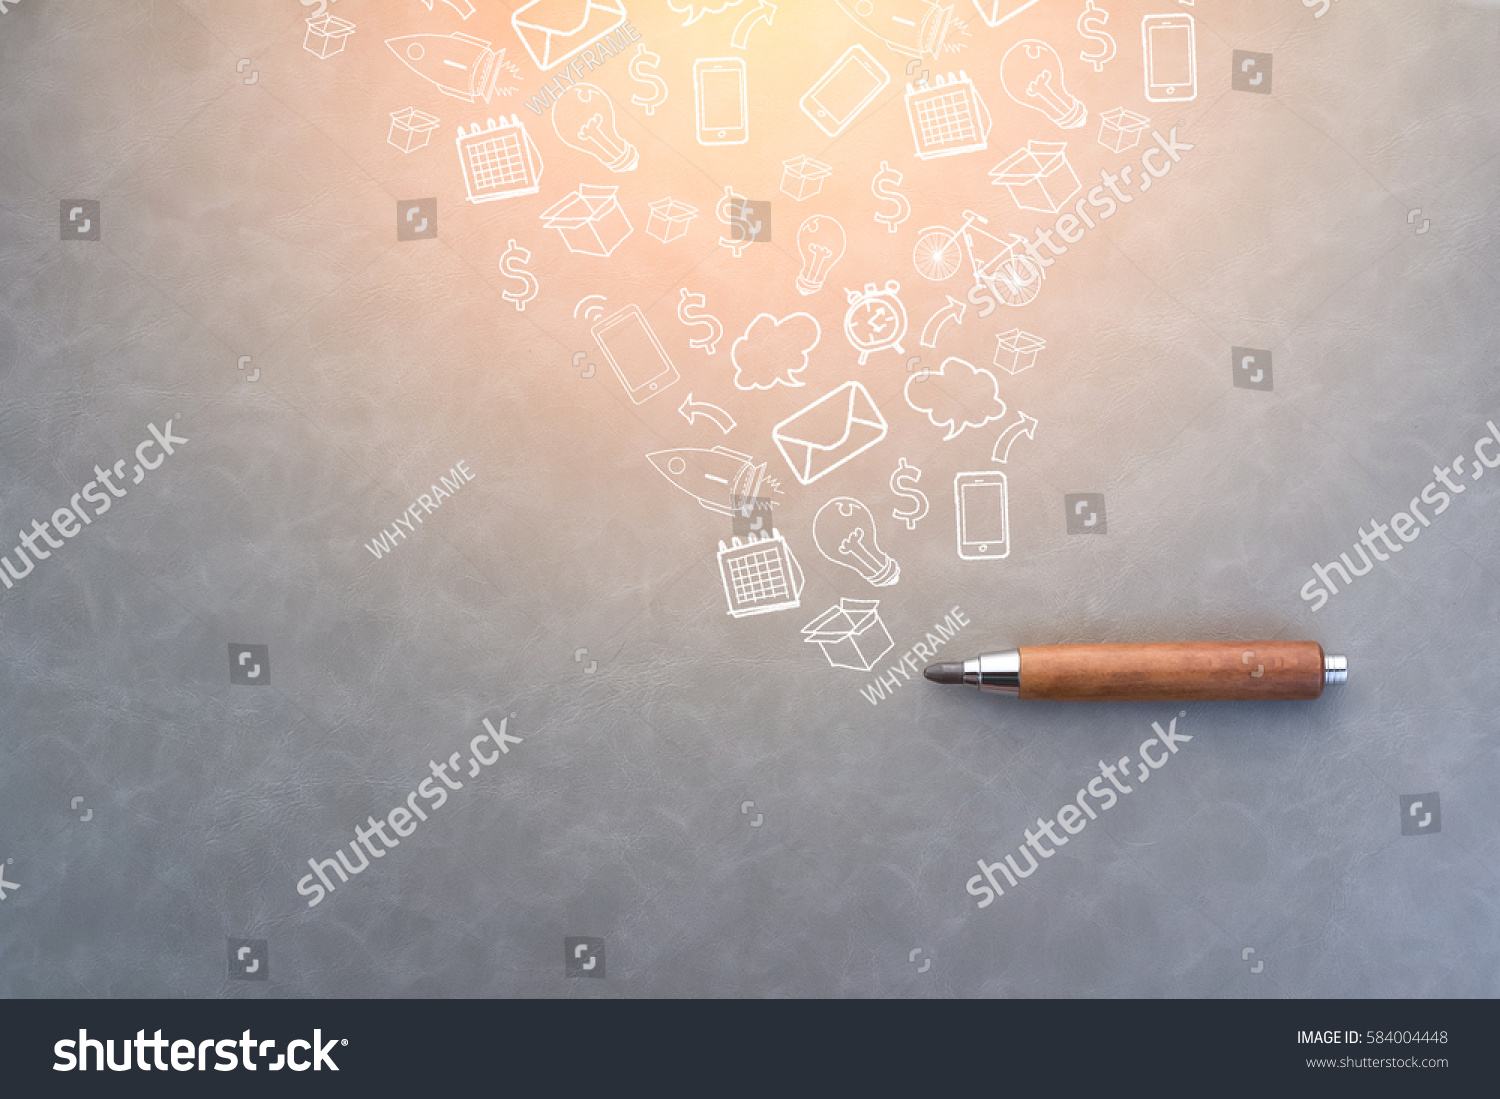 Wooden Pencil On Grey Leather Background Stock Photo